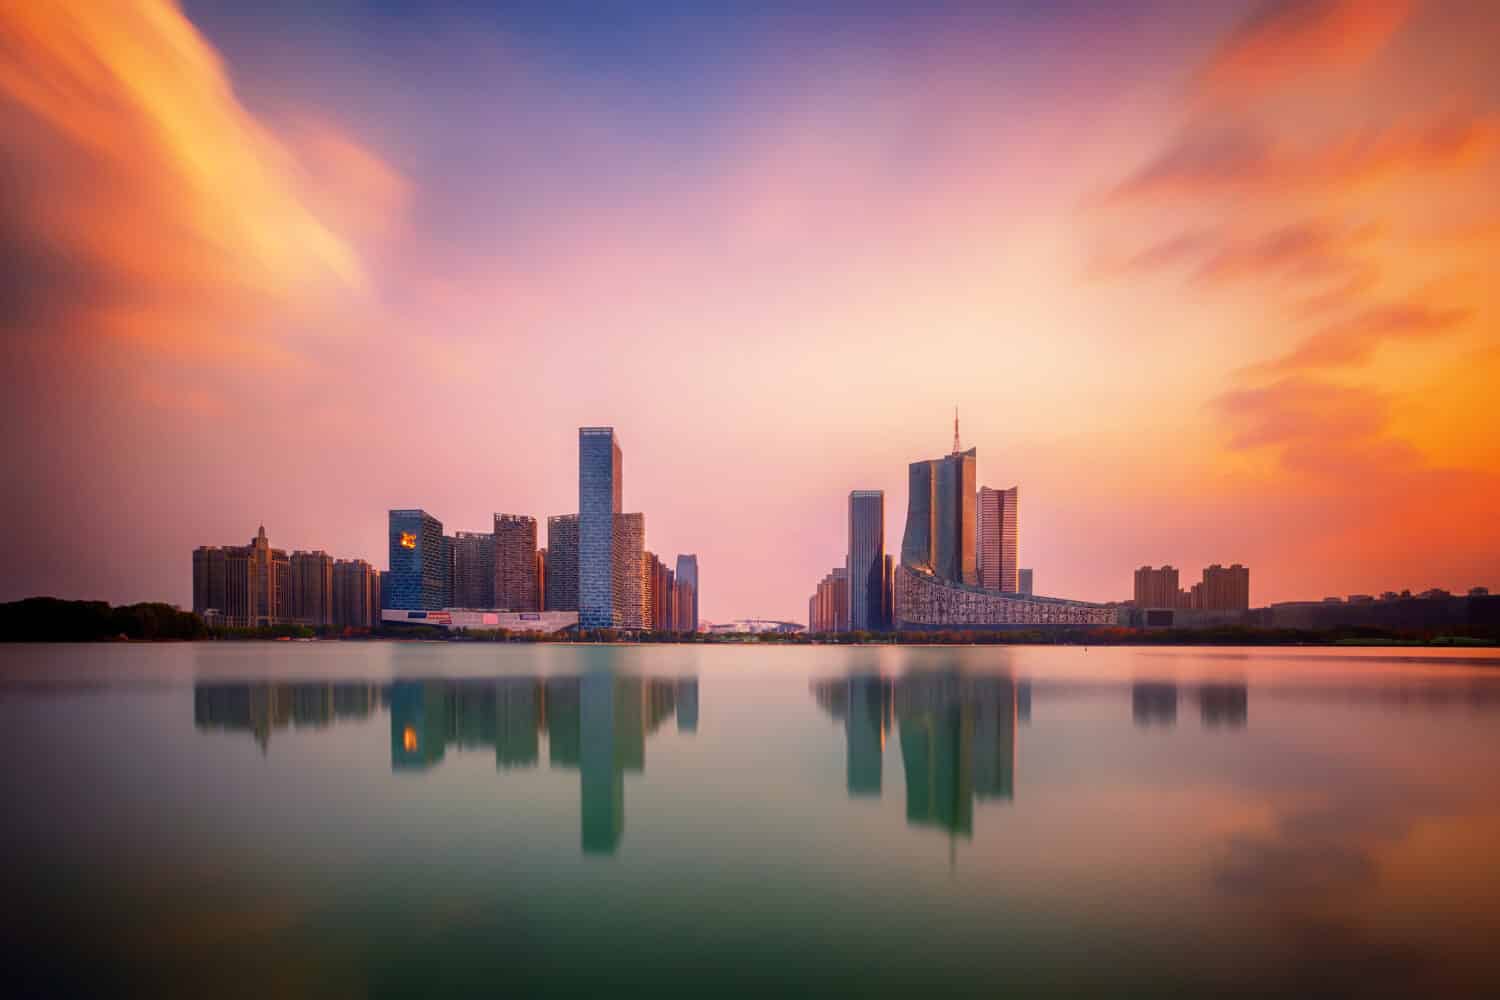 sunset over Swan Lake financial business district, Hefei city, Anhui province, China